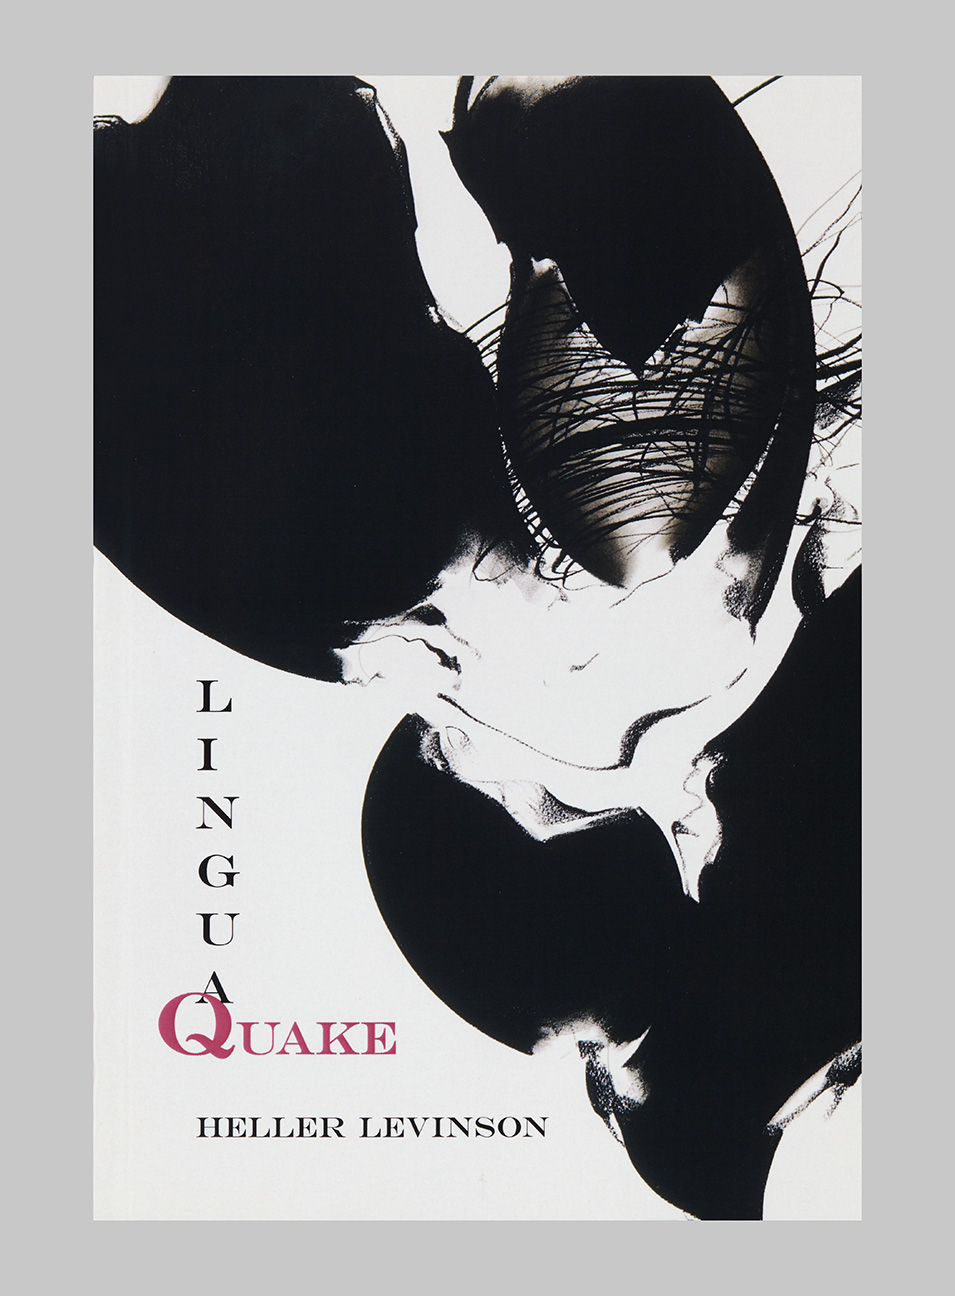 Lingua Quake, Poems by Heller Levinson, cover art and design by Linda Lynch, 2018, Black Widow Press